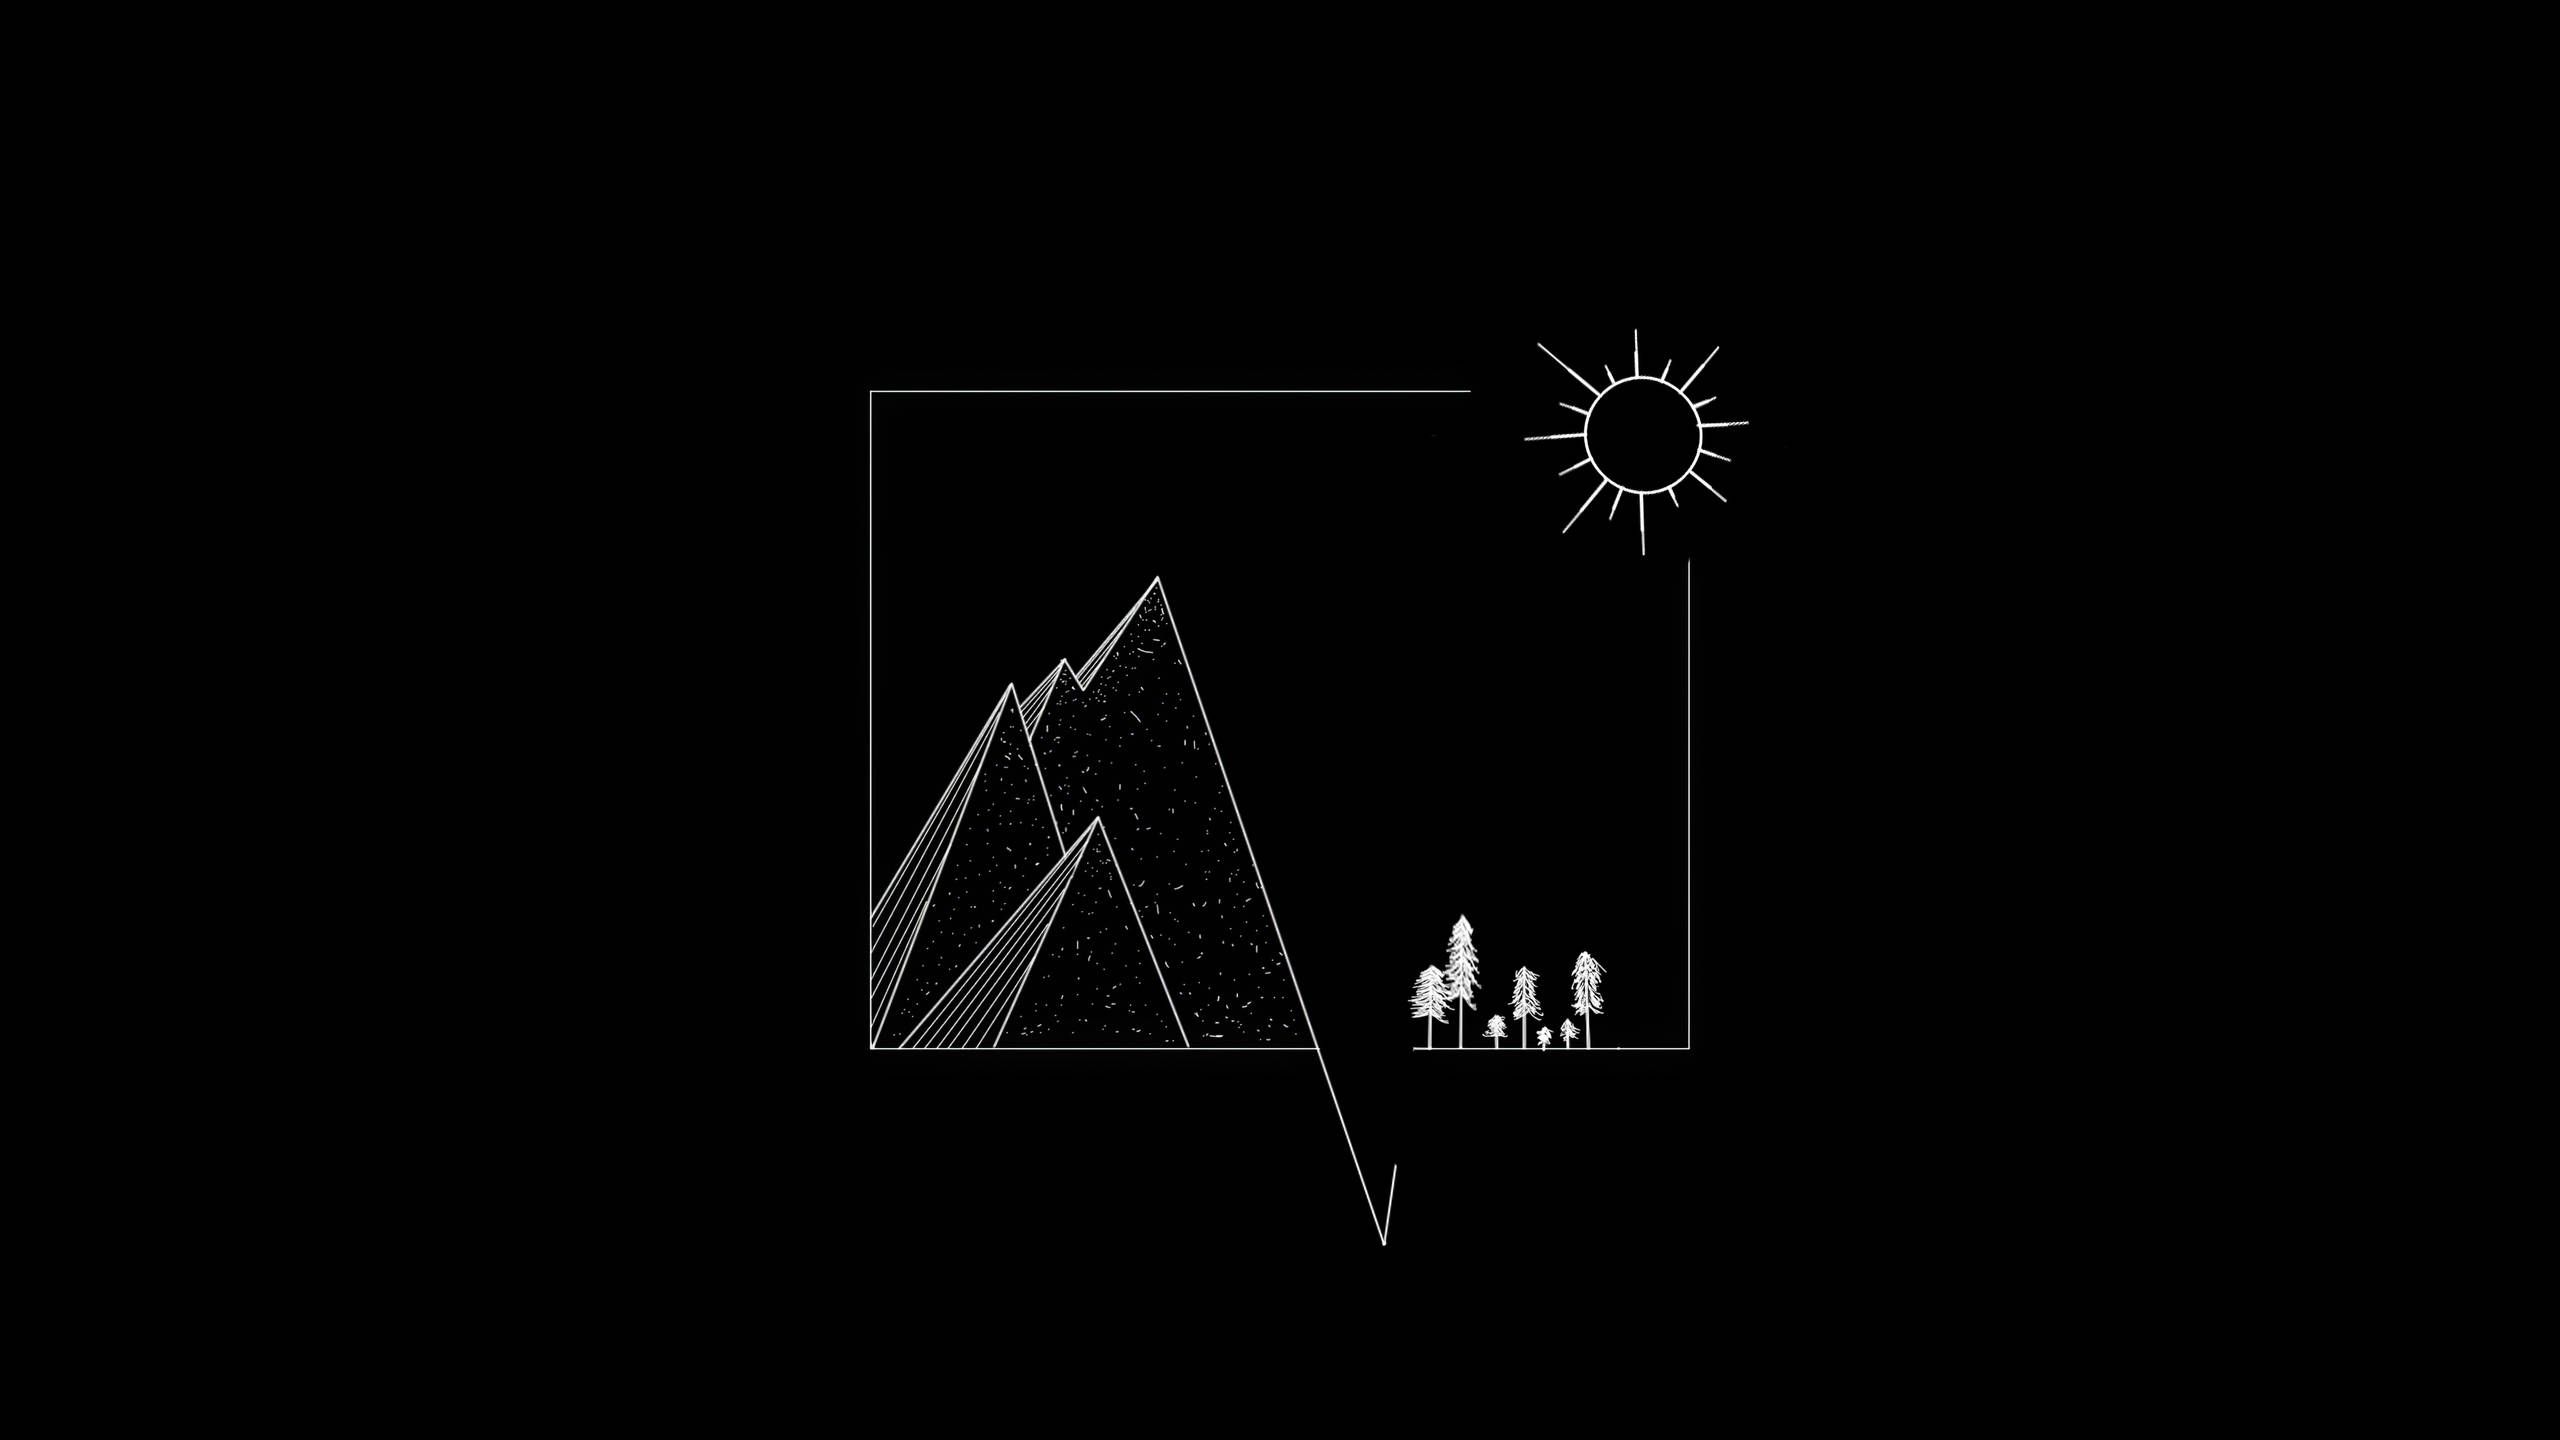 A black and white image of a mountain range, with a sun above and a tent pitched on the side. - Minimalist